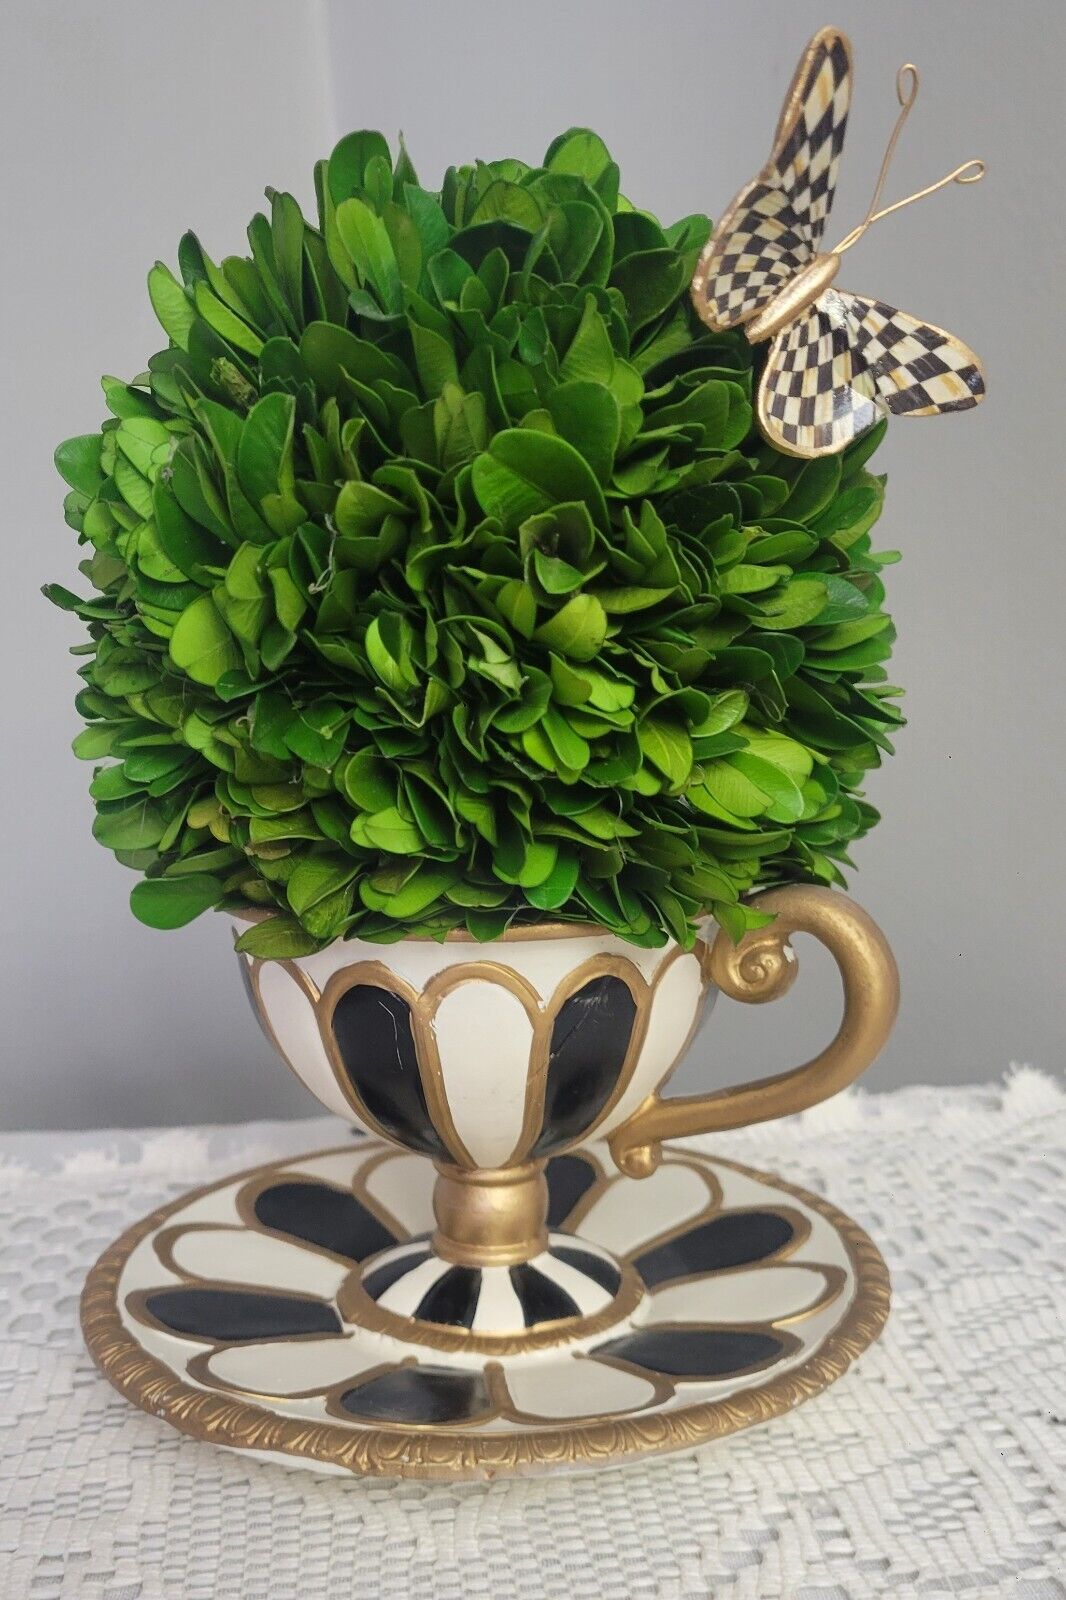 ♡Mackenzie Childs Topiary Demitasse Teacup With Courtly Check Butterfly 